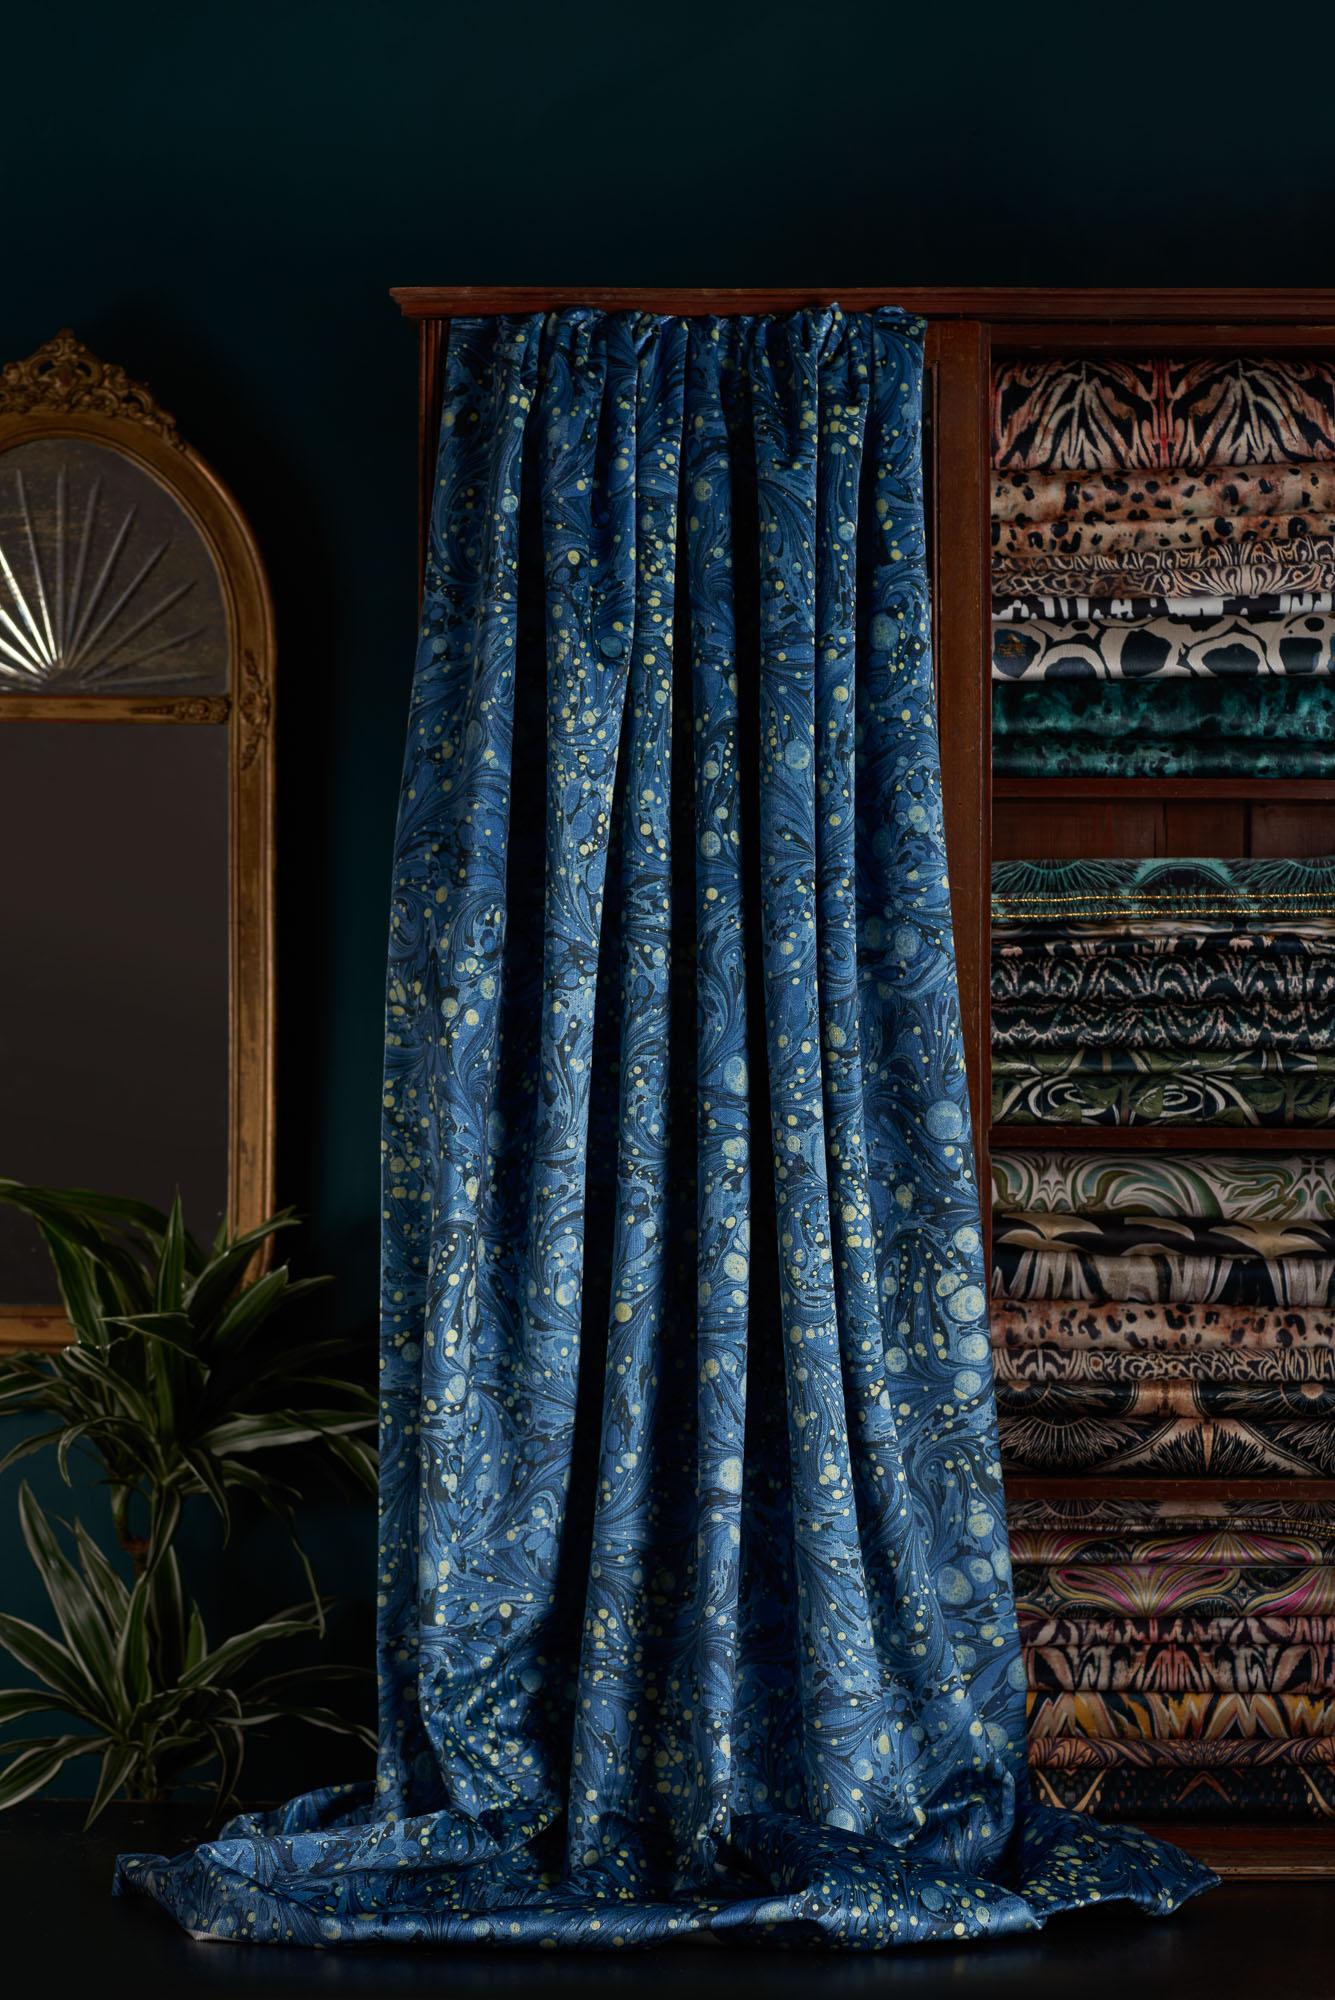 Meet our beautiful swirling blue marbled design – named Starry Night of course for its Van Gogh-like allusions. Created by insanely talented artist, Freya Scott, from Paperwilds.

This velvet has a very different handle from our standard velvet.